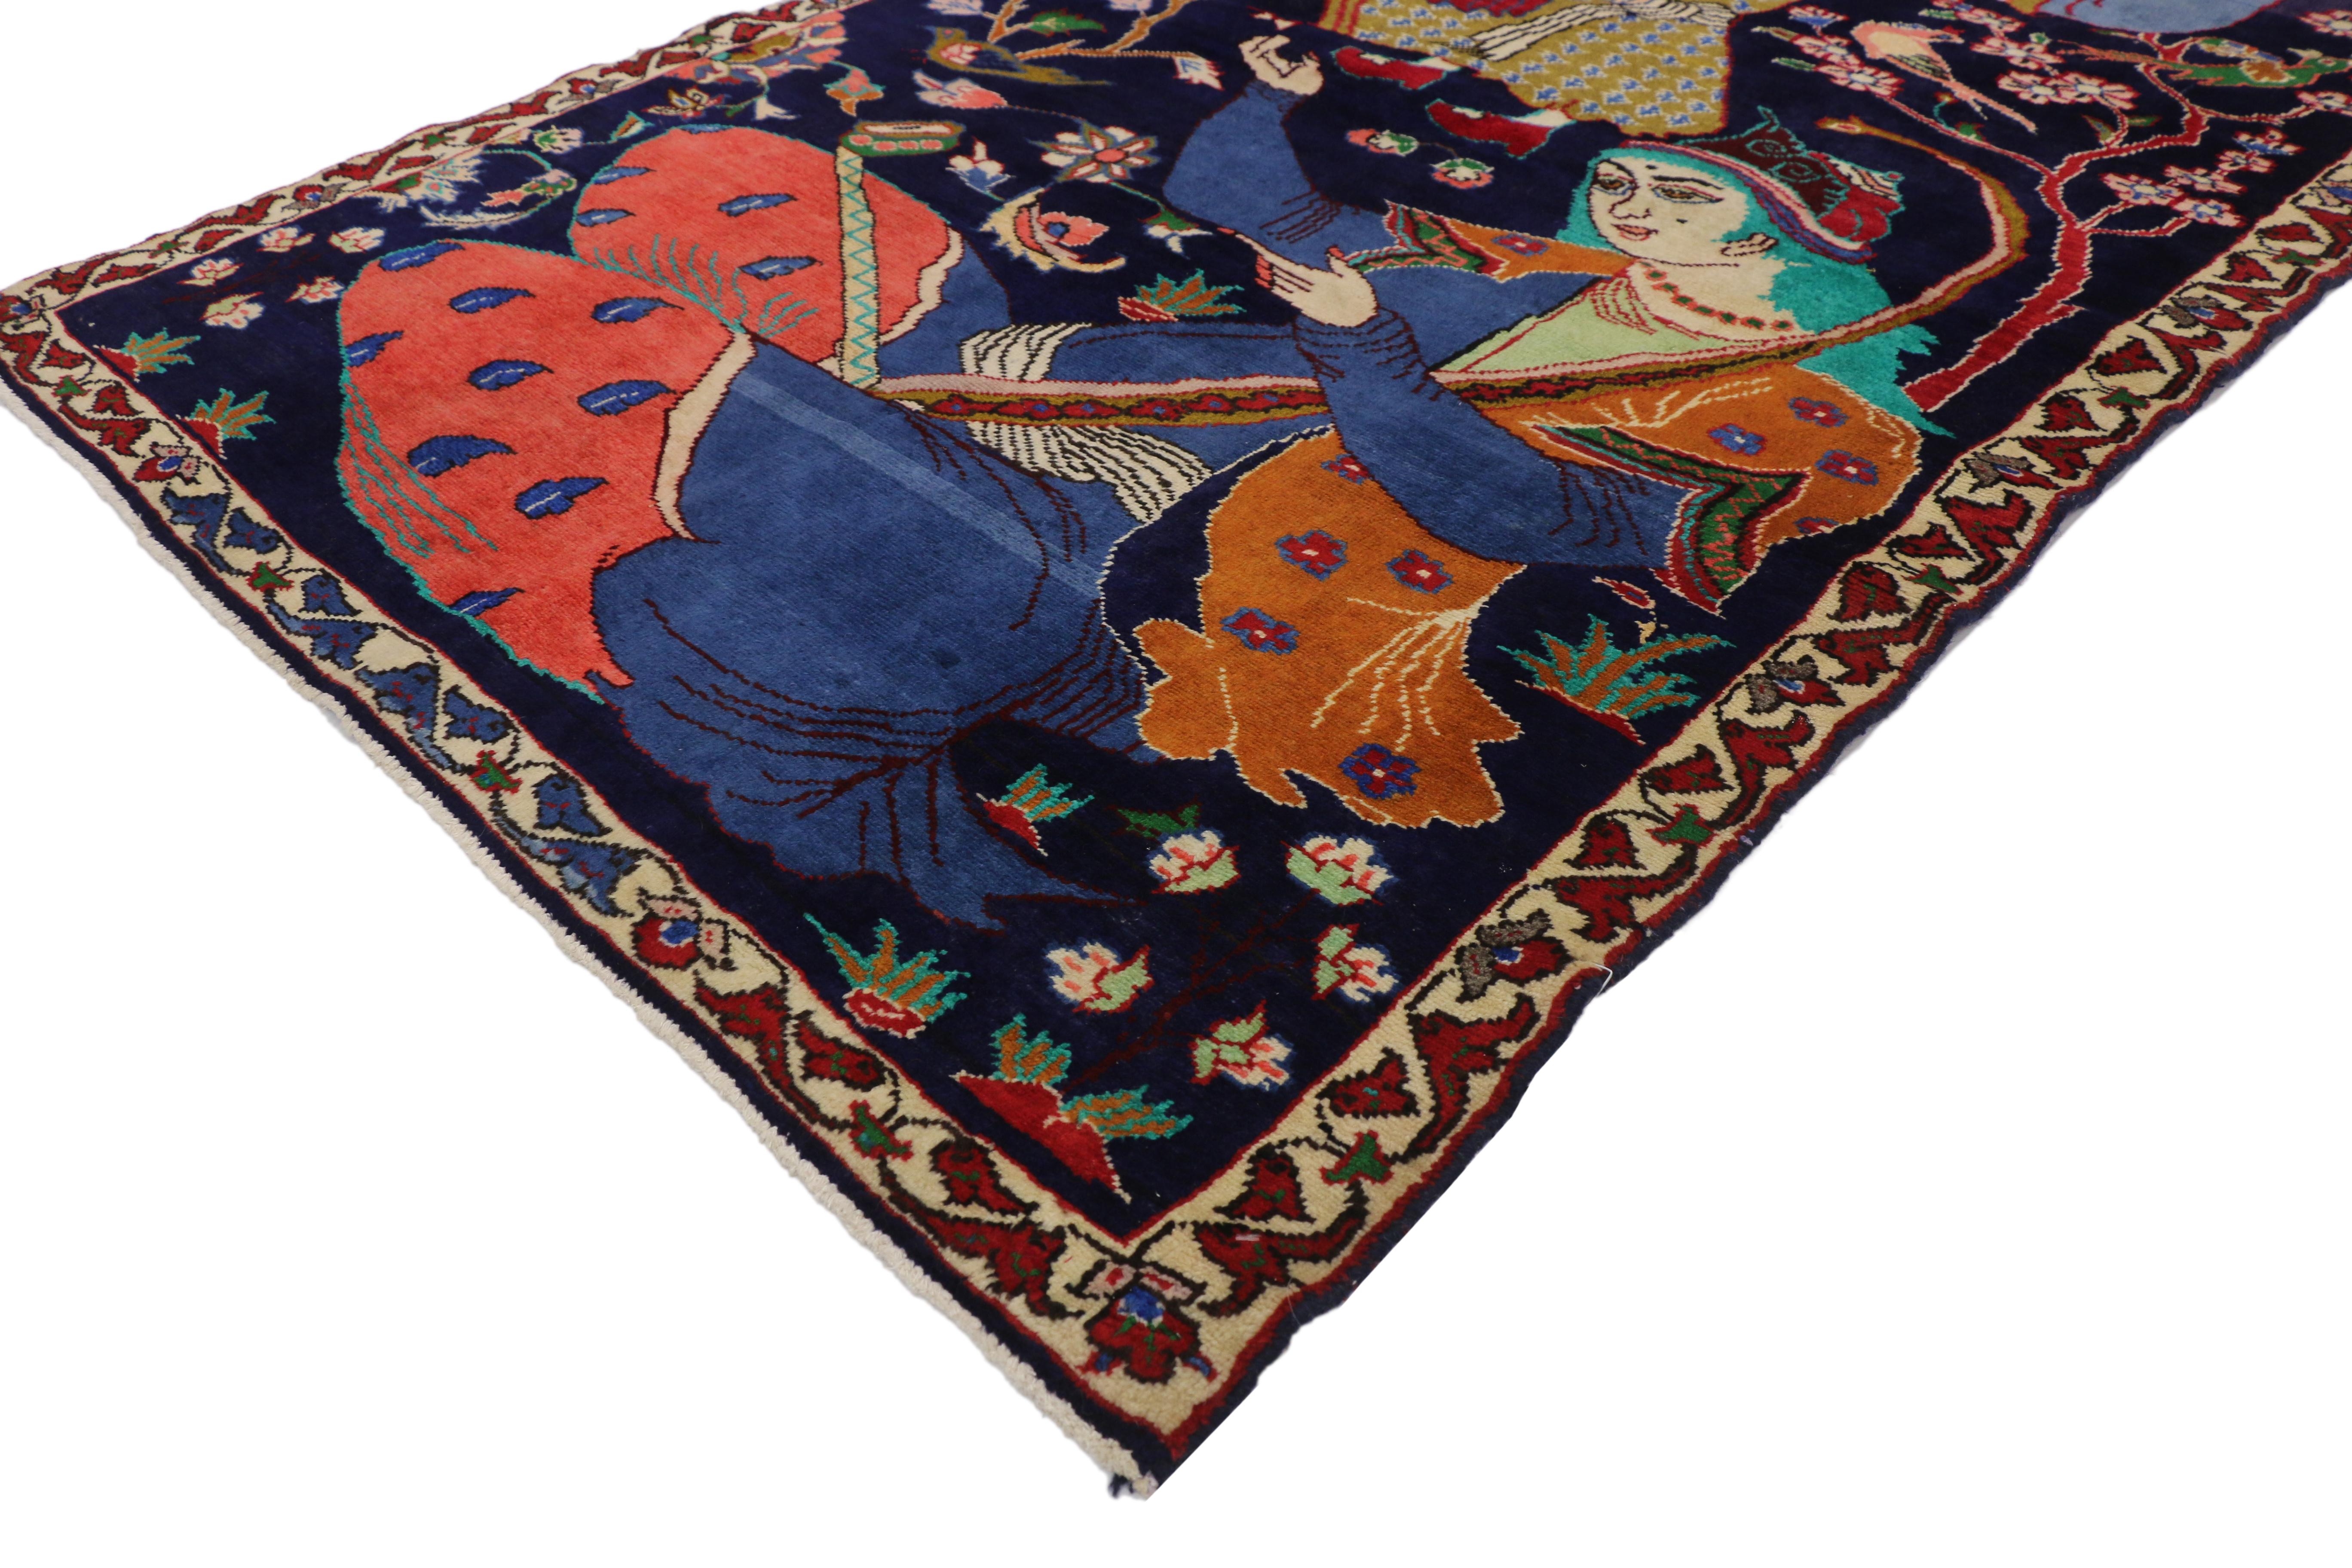 75975, vintage Hamadan Persian rug with Dervish Pictorial, figurative tapestry wall art. This hand knotted wool vintage Persian Pictorial rug features a bright and lively garden scene of a Dervish with his master wearing traditional Persian garb and